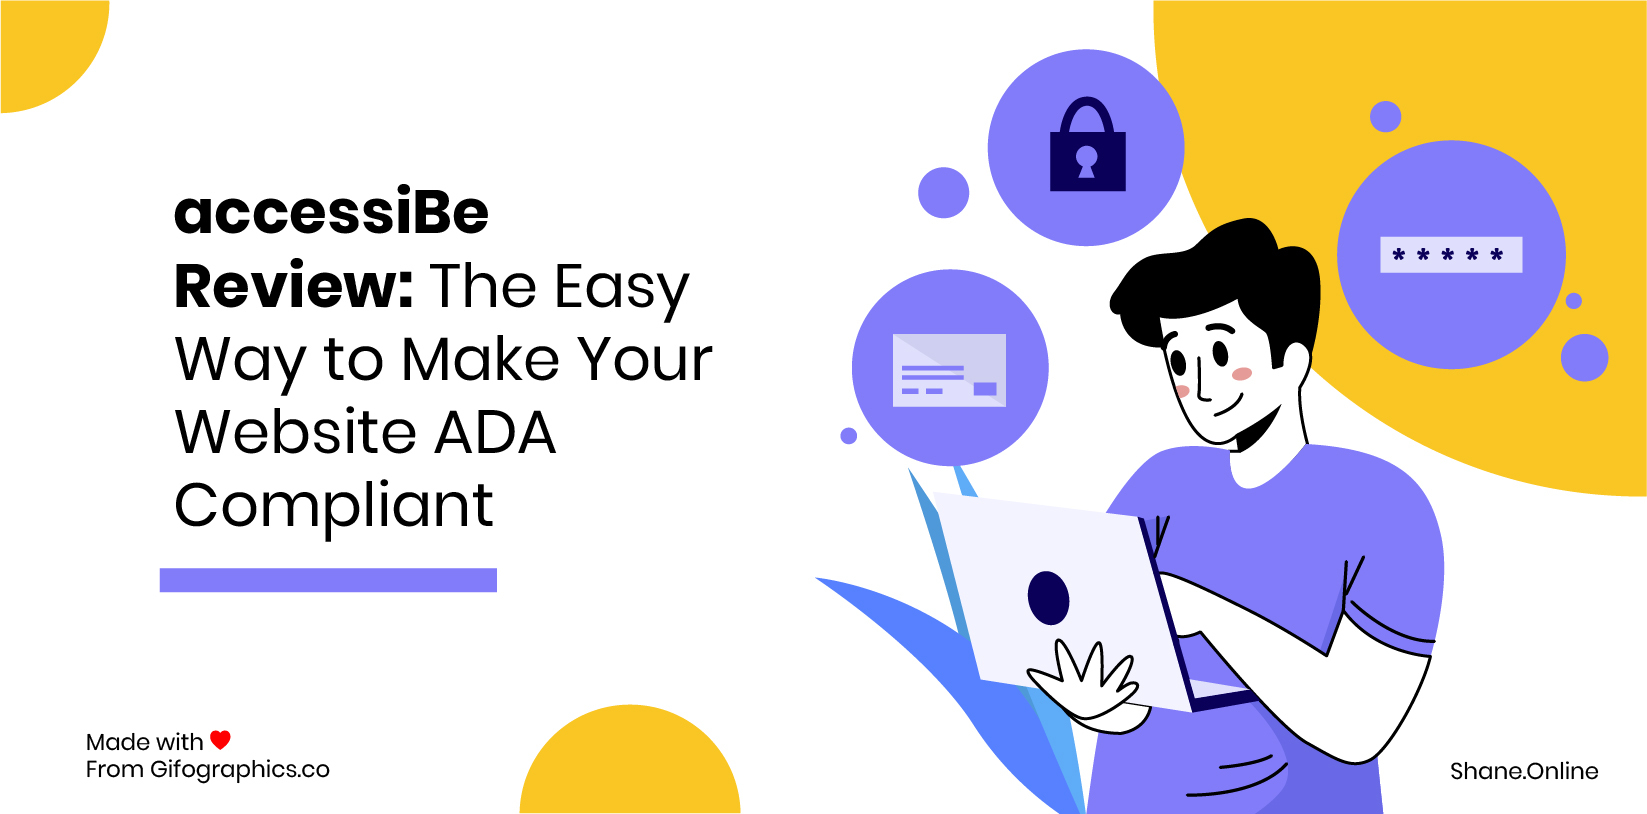 accessiBe Review- The Easy Way to Make Your Website ADA Compliant